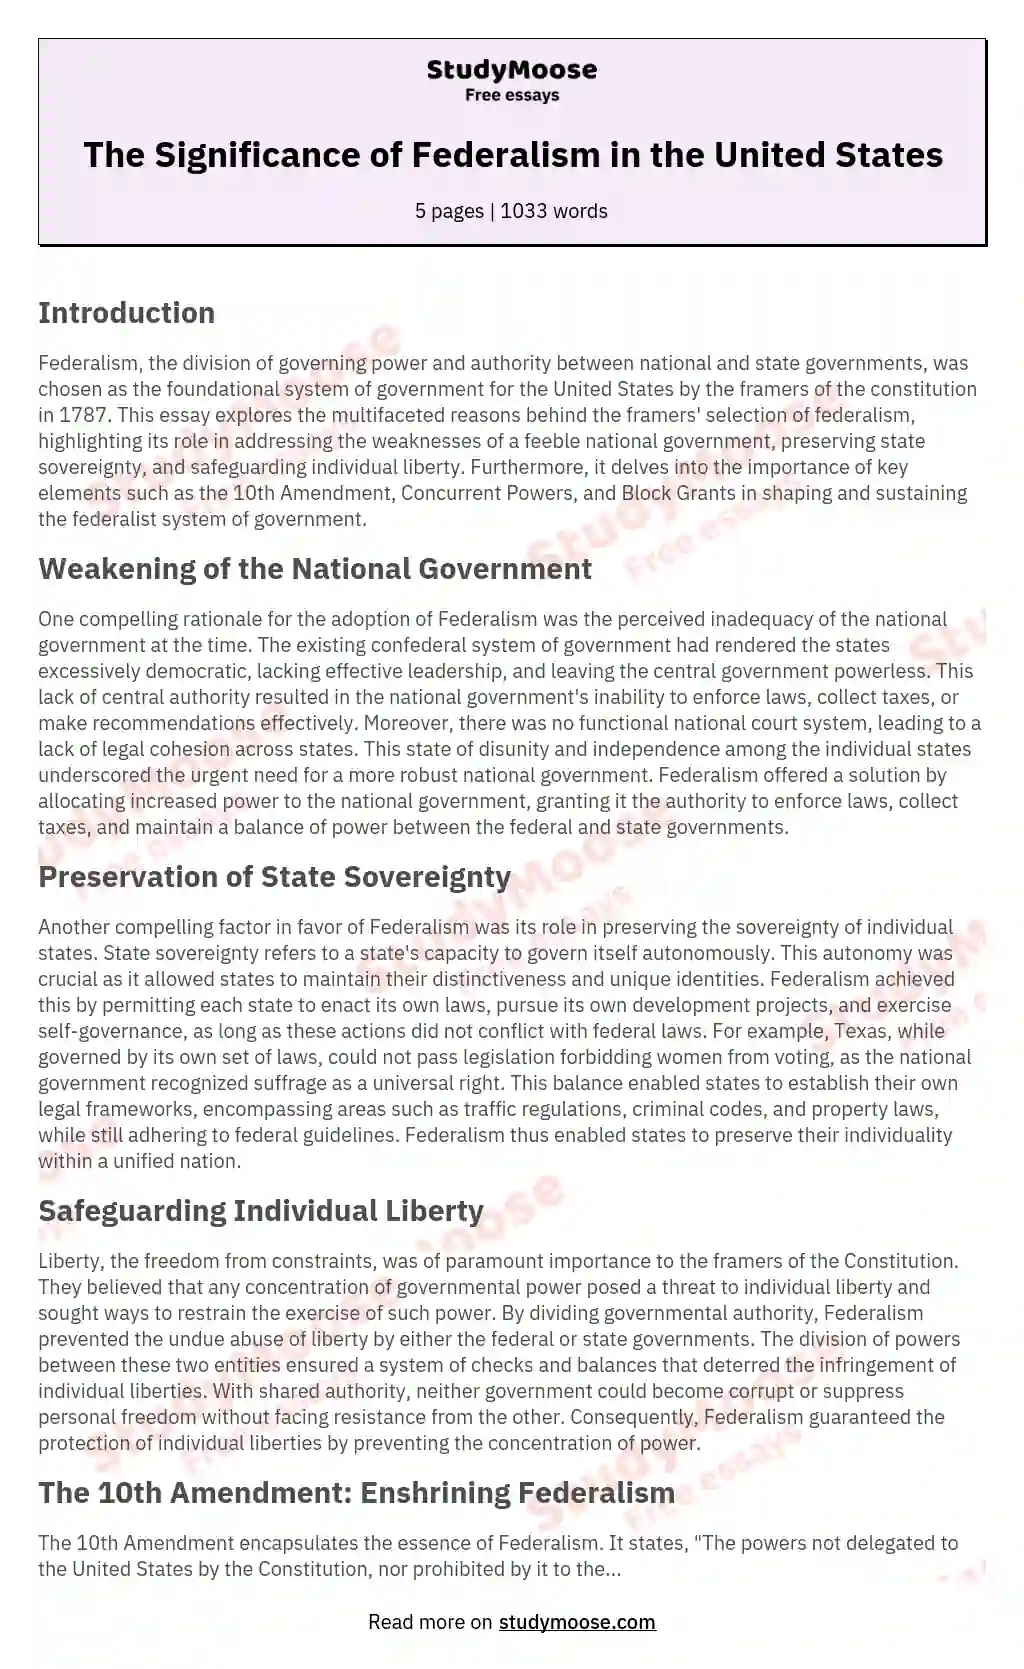 The Significance of Federalism in the United States essay